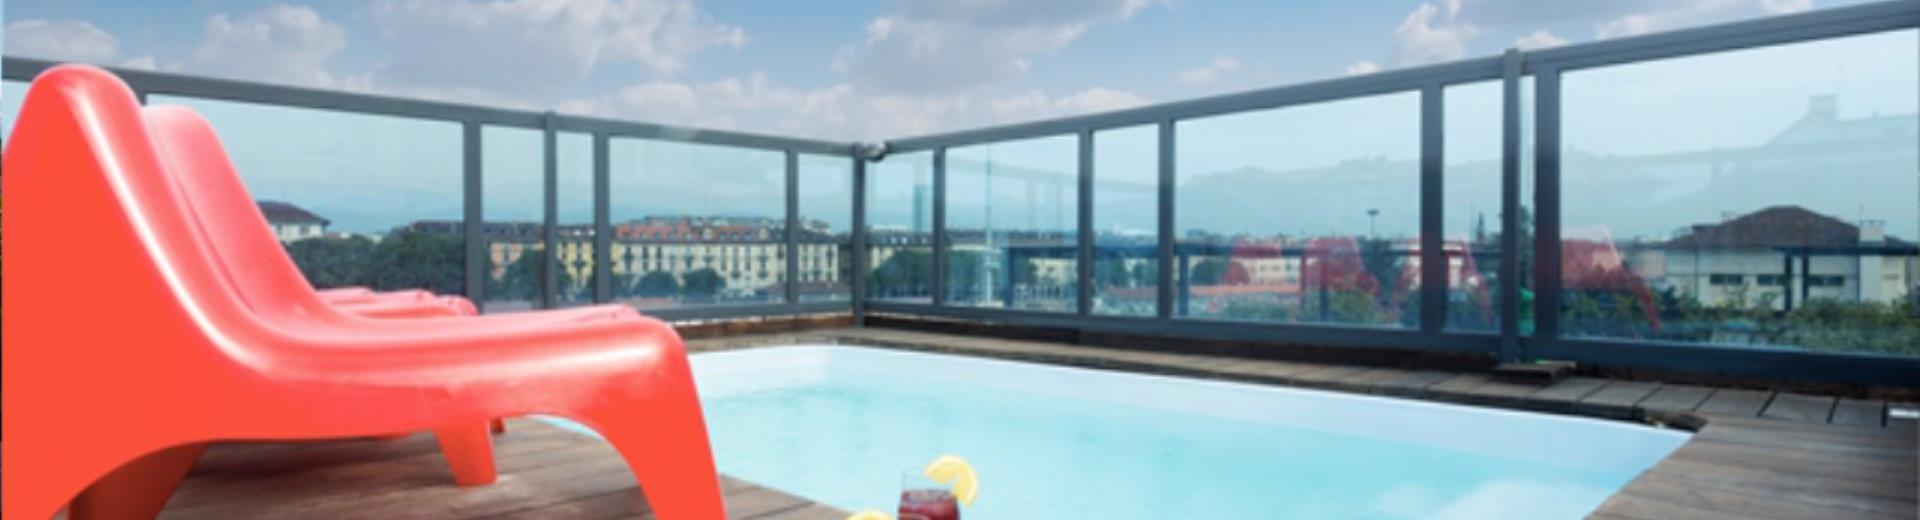 Best Western Plus Executive Suites, 4 star hotel located in the Centre of Turin, offers its guests an oasis of relaxation really special: on the top floor of the building there is The Executive Rooftop where you can enjoy the beautiful view of the city immersed in the outdoor pool.